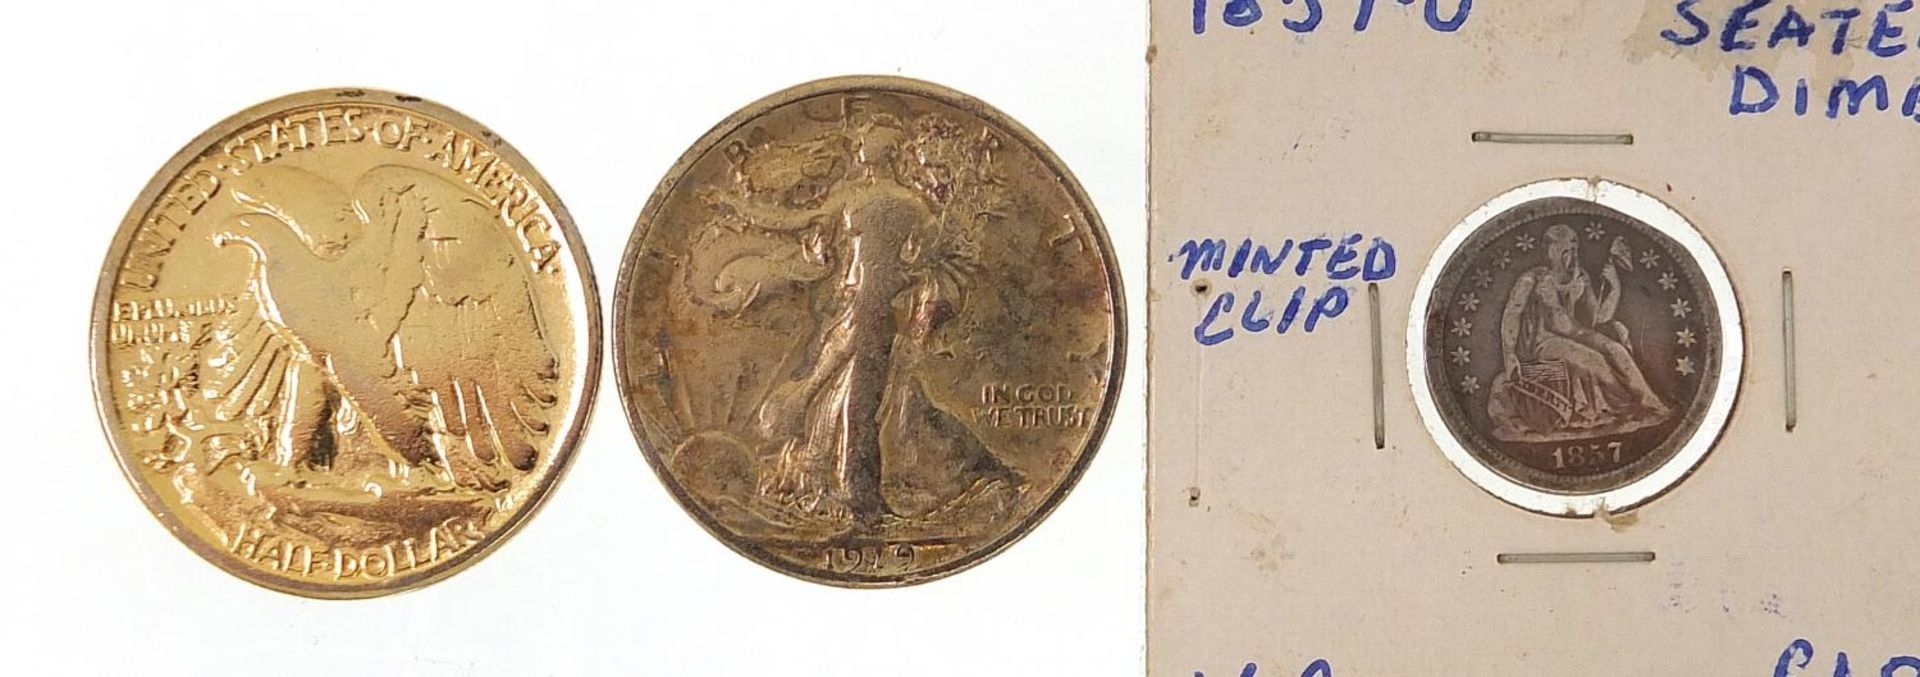 19th century and later American coinage including 1857 one dime, 1922 dollar and three half dollars, - Image 5 of 6